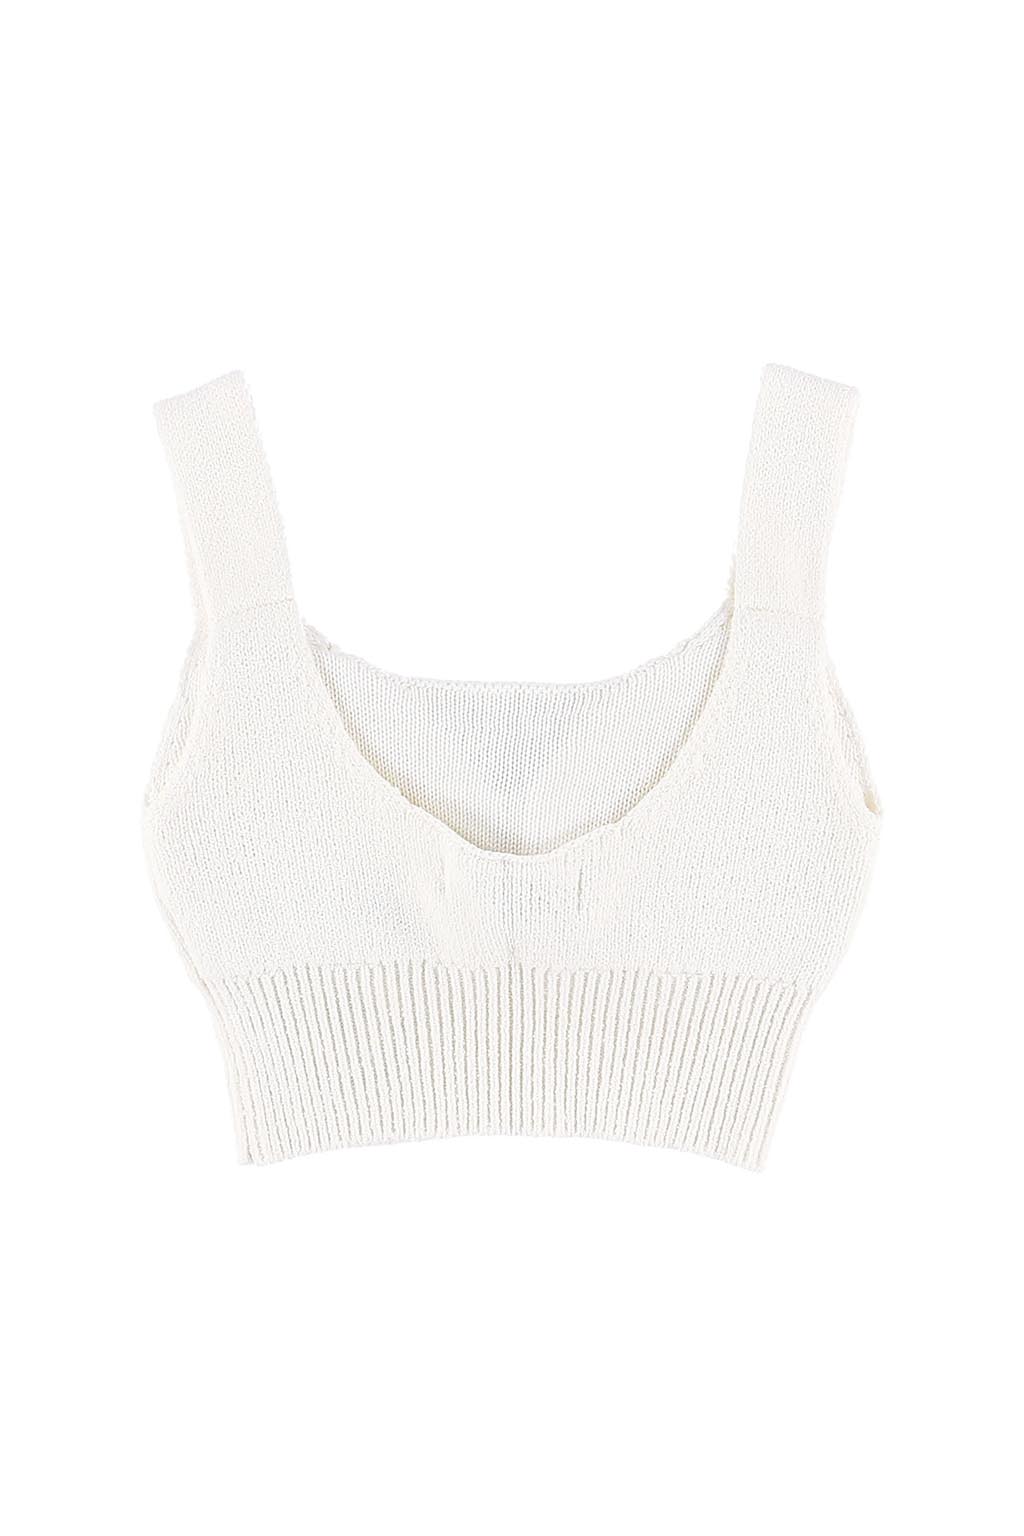 padded-knit-tank-top-white-07